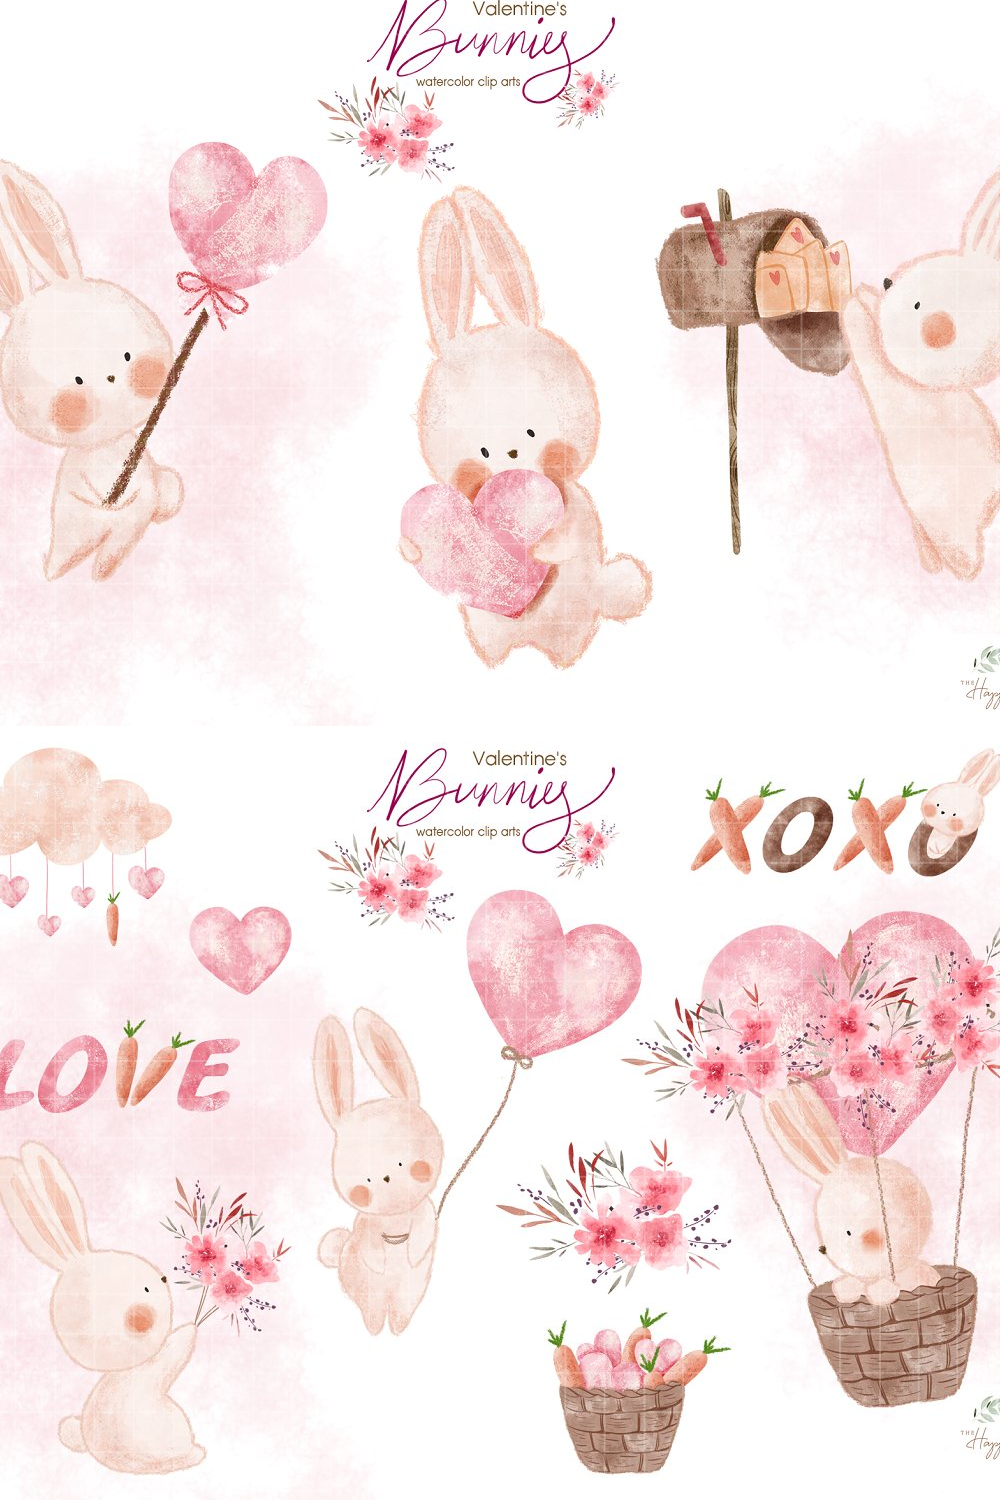 Illustrations cute bunnies valentines day clipart of pinterest.